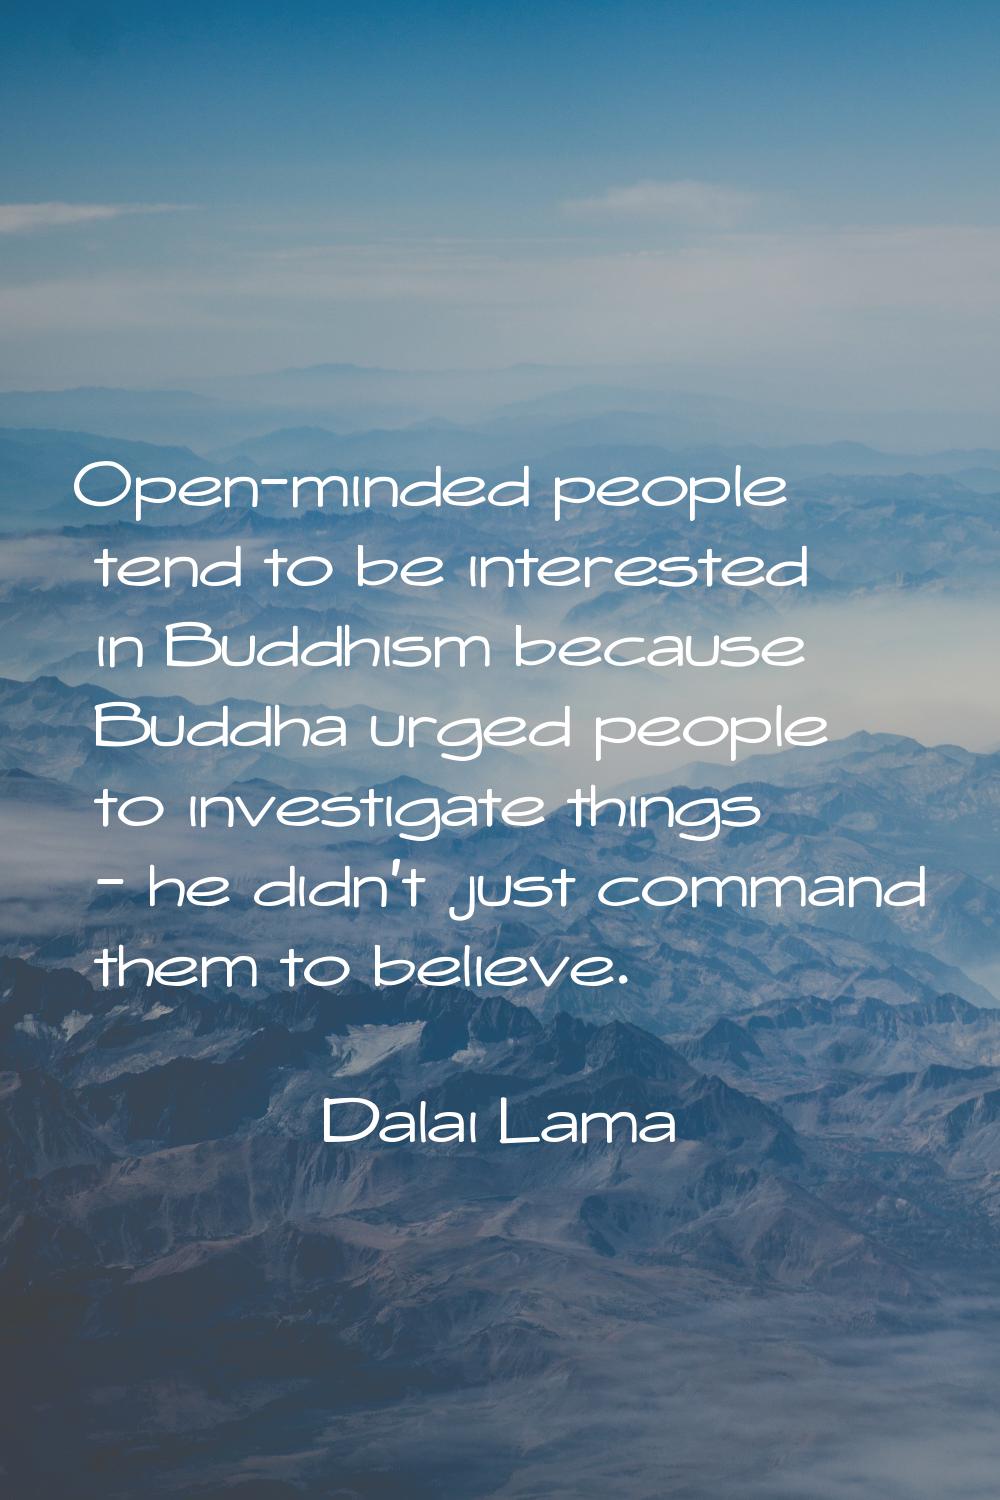 Open-minded people tend to be interested in Buddhism because Buddha urged people to investigate thi